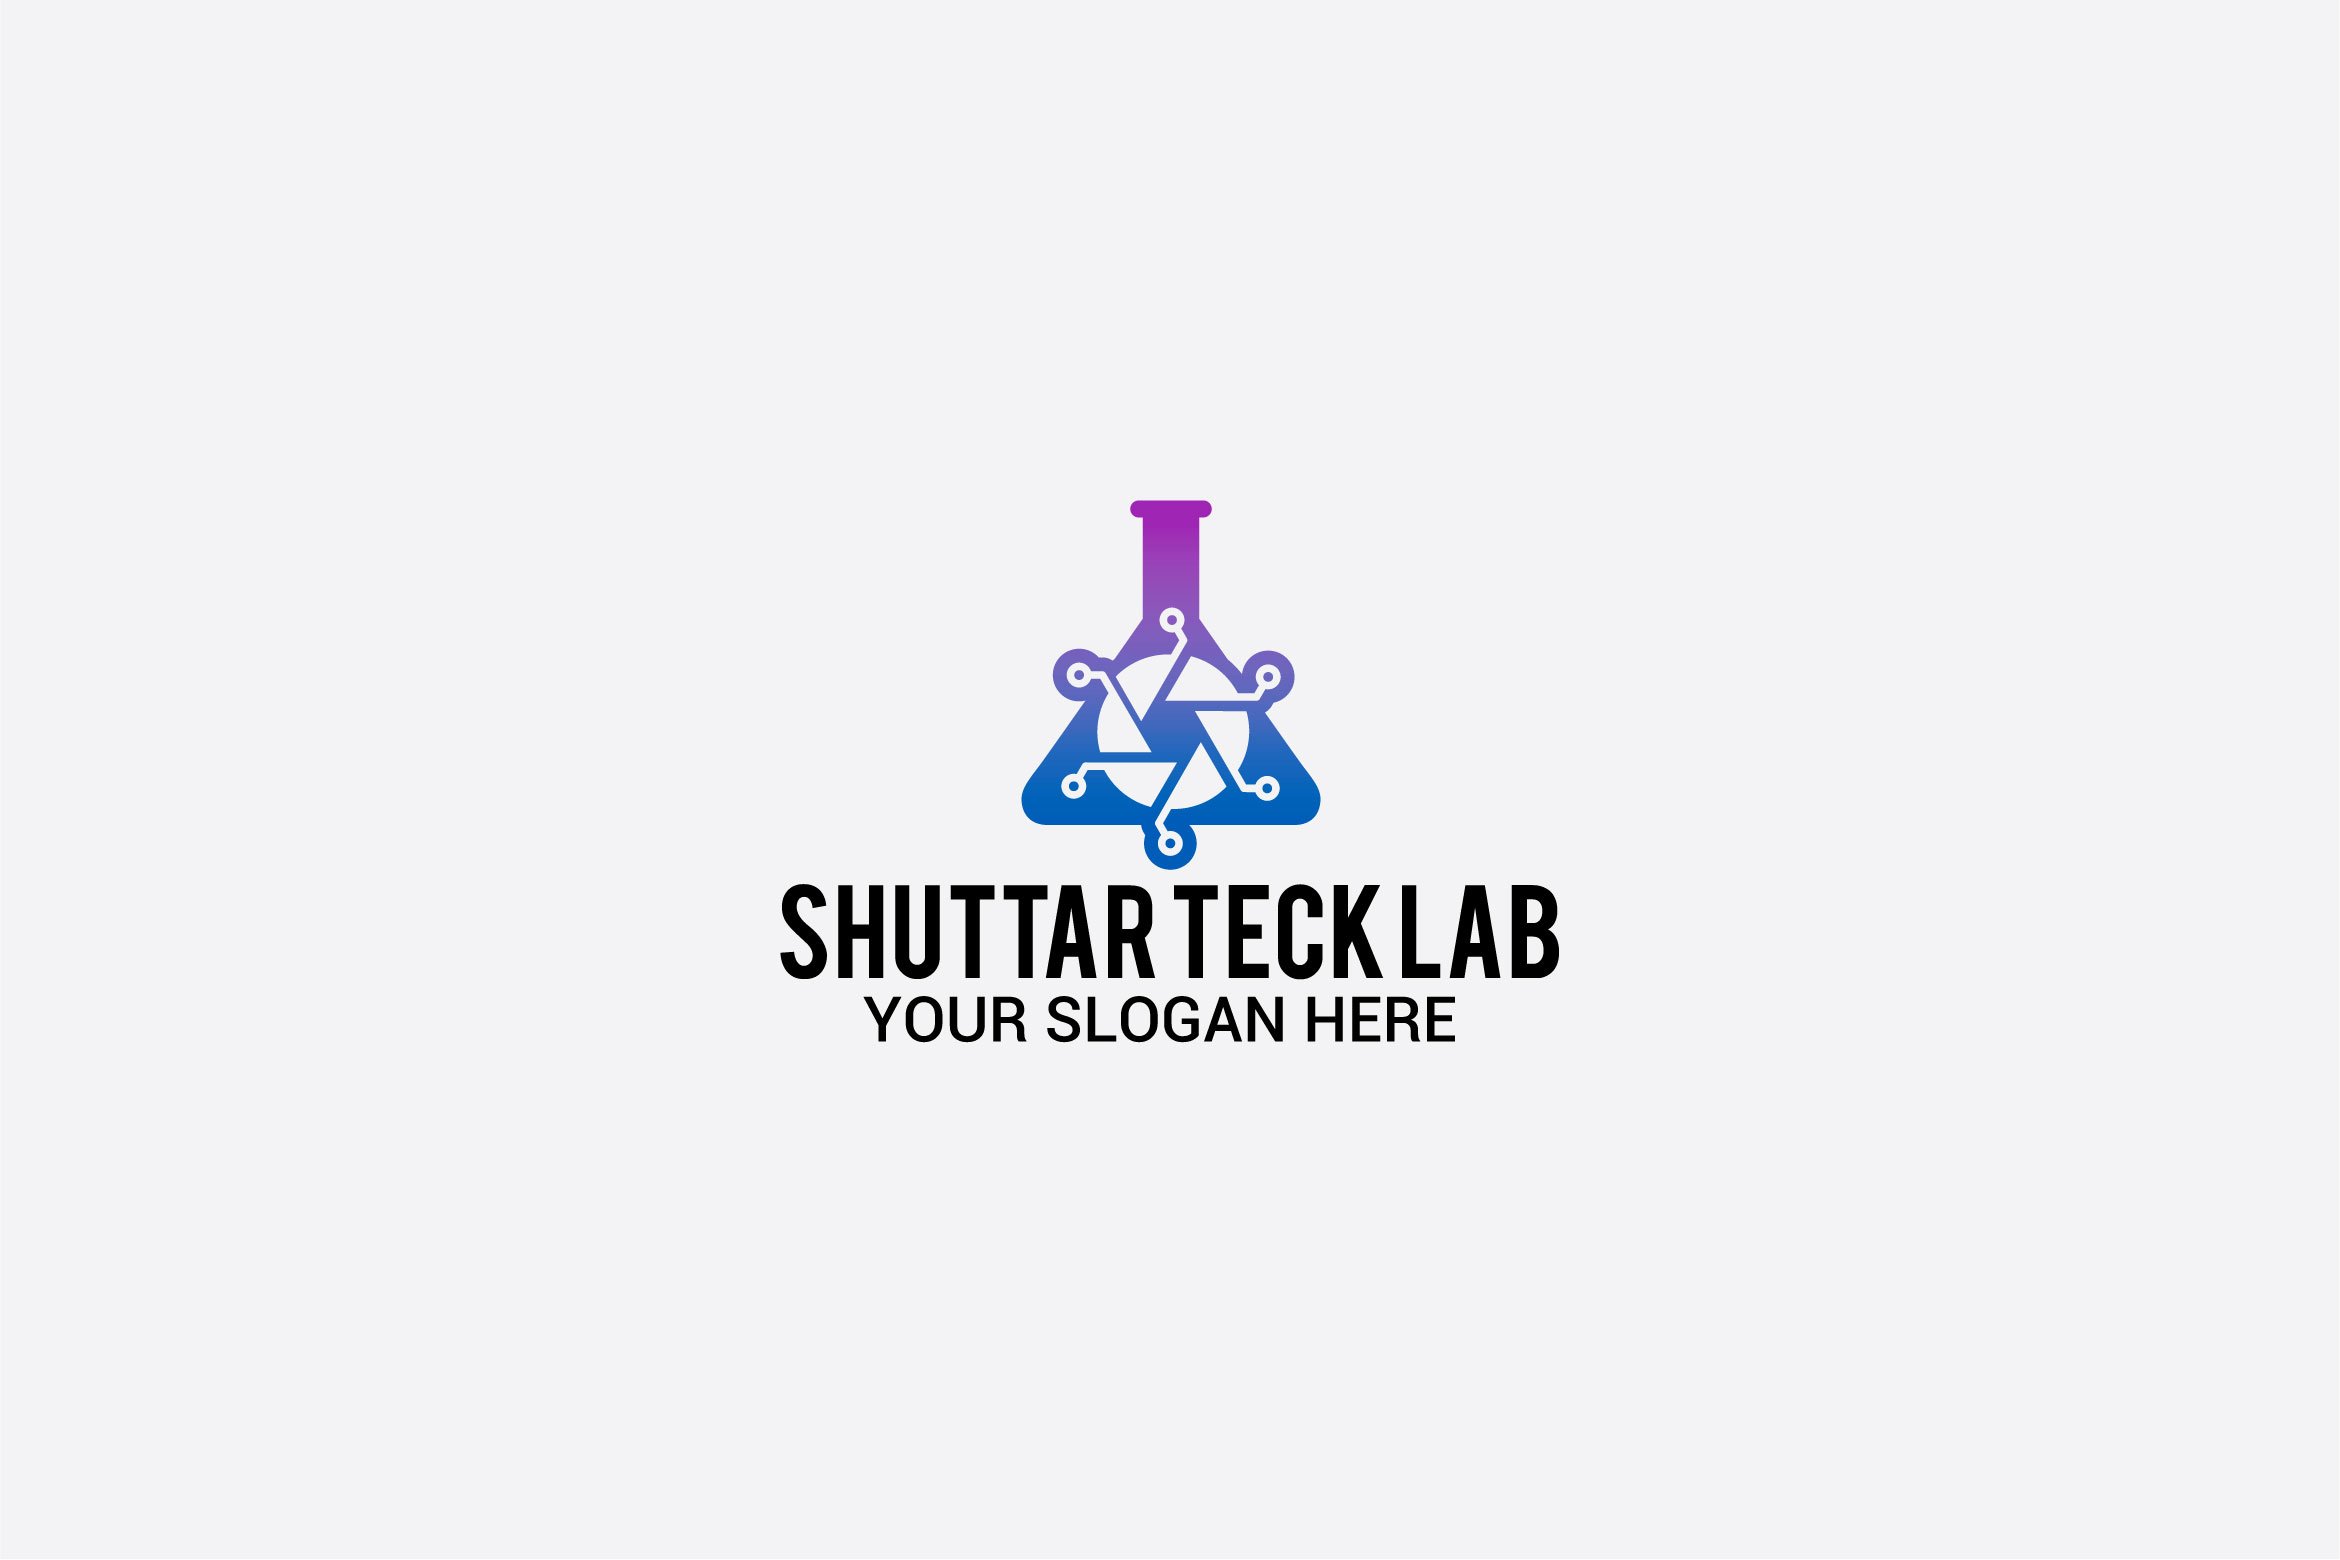 Light background with the colorful tech lab logo.